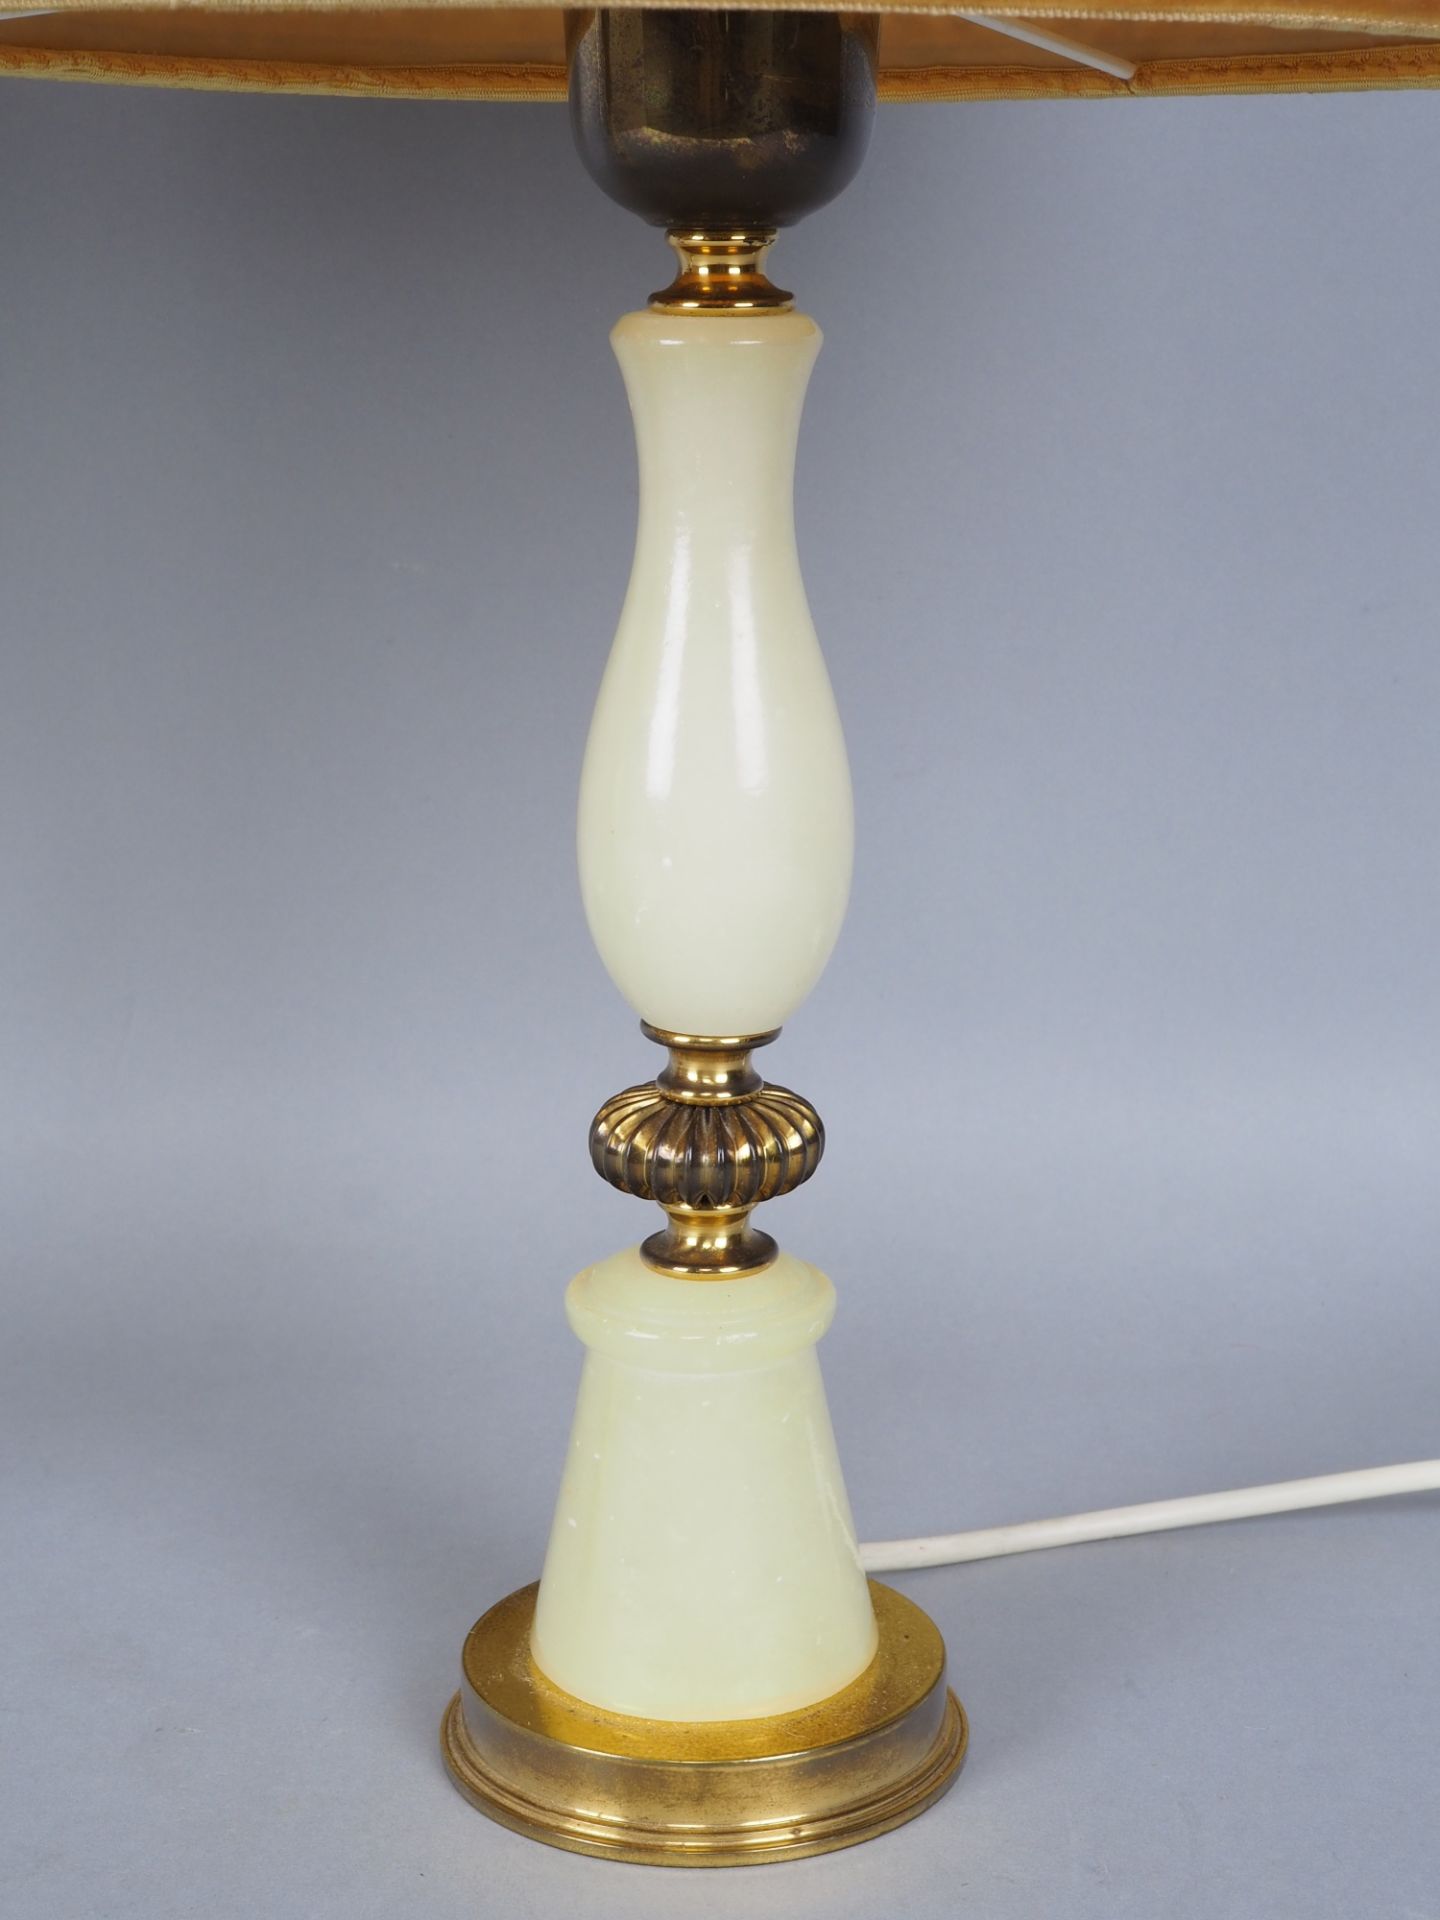 Pair of alabaster table lamps - Image 2 of 2